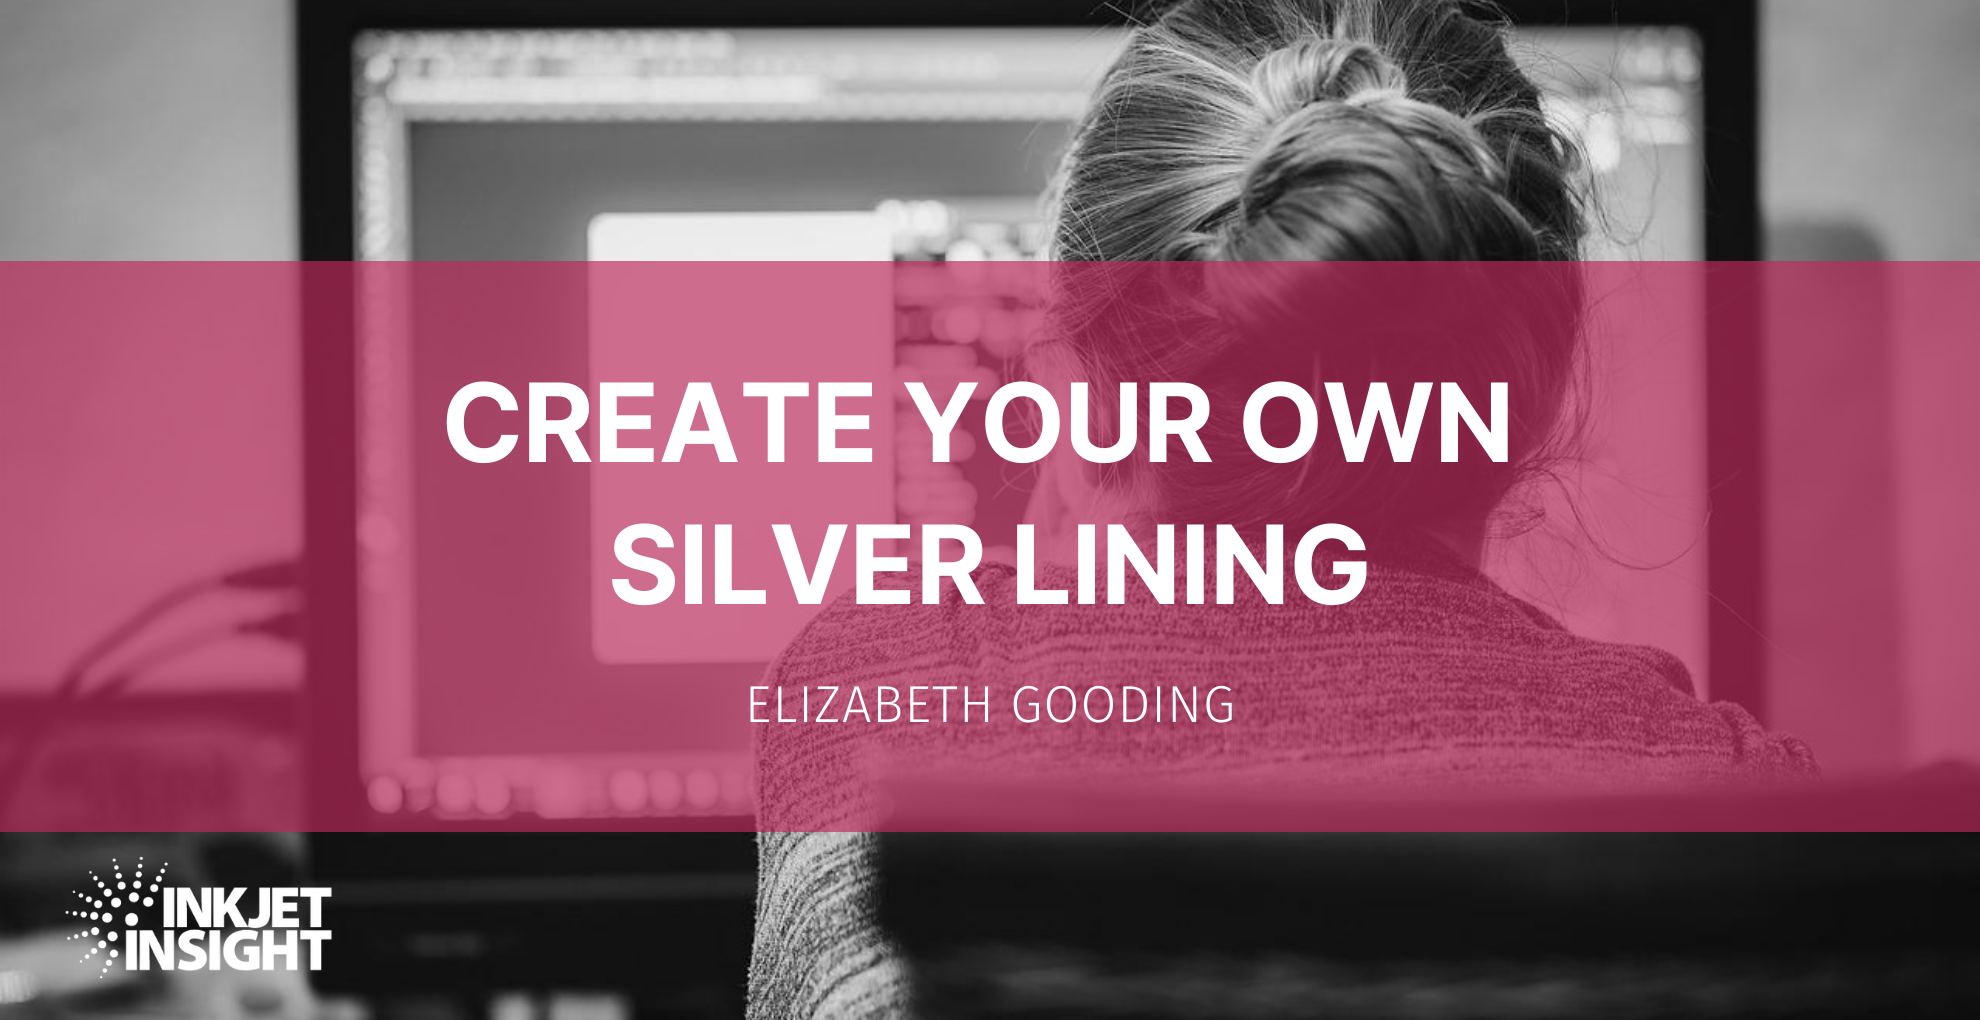 Featured image for “Create Your Own Silver Lining”